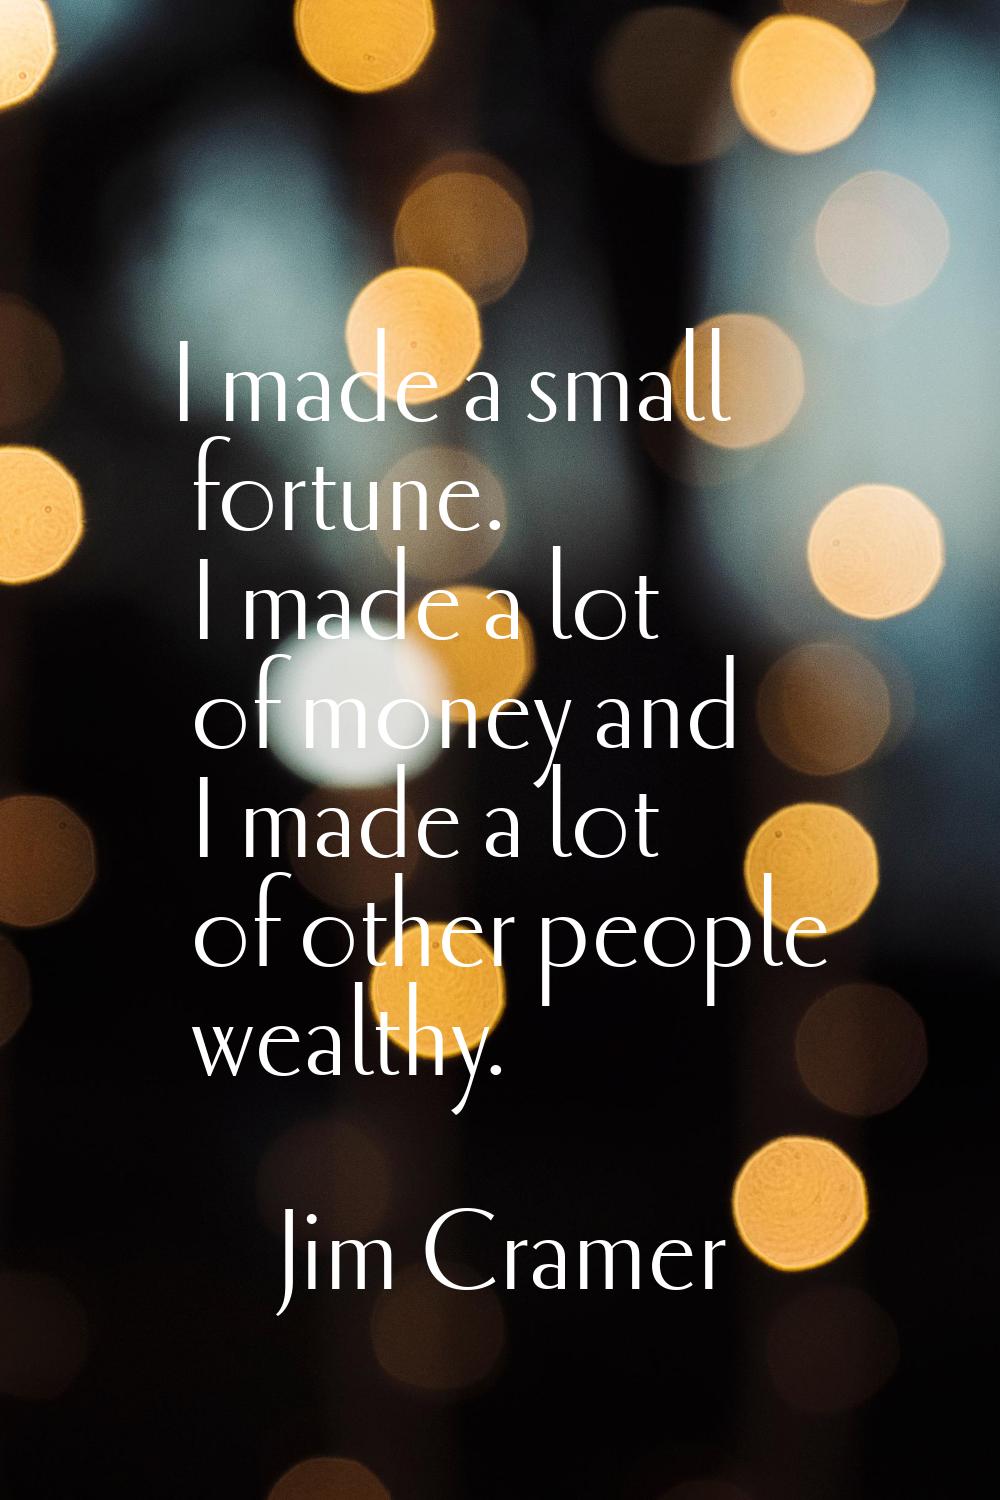 I made a small fortune. I made a lot of money and I made a lot of other people wealthy.